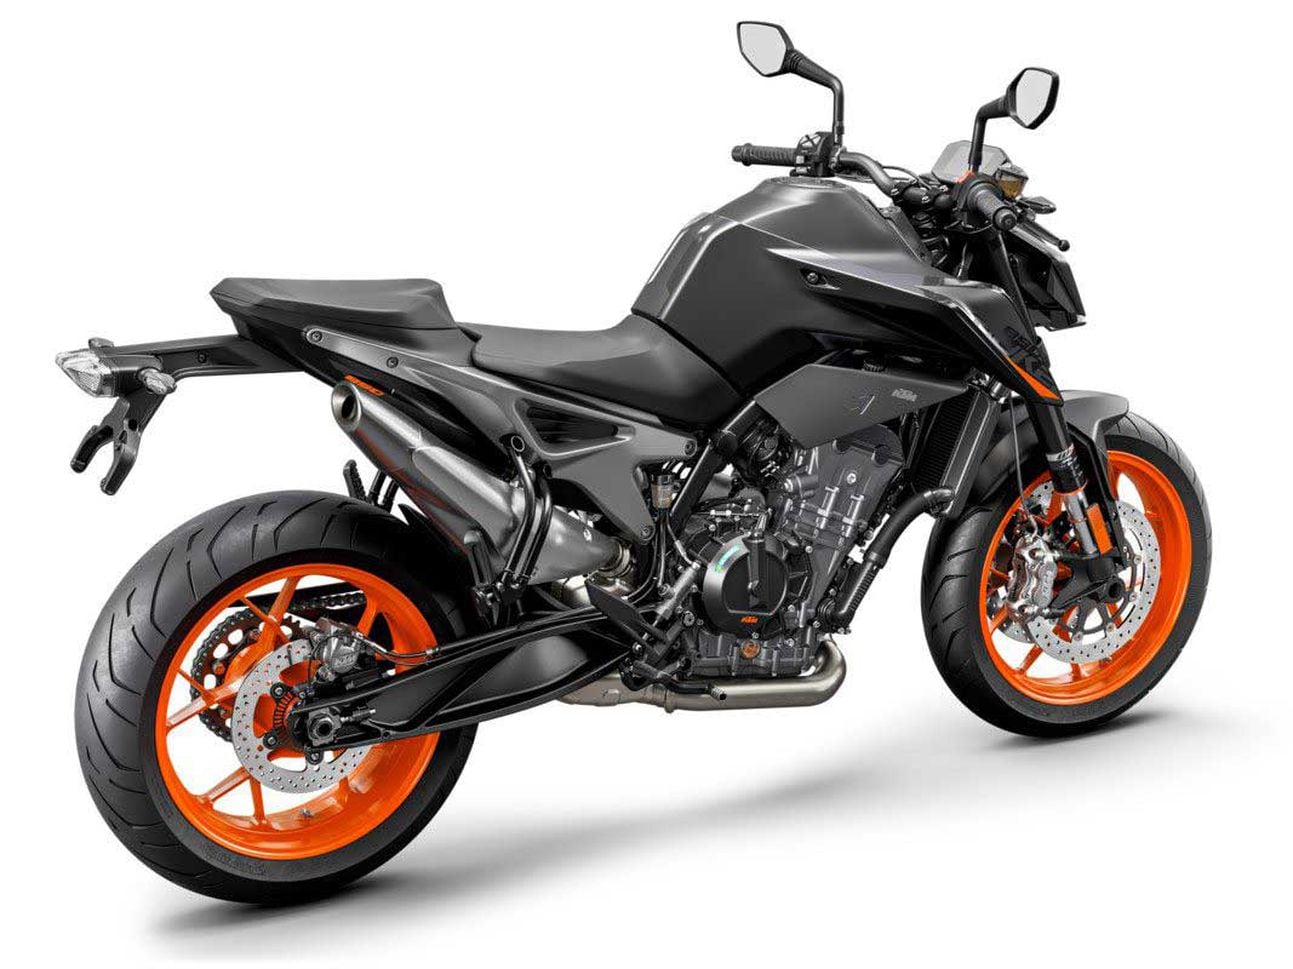 The 2021 KTM 890 Duke starts at $10,999—just $300 more than the 790.